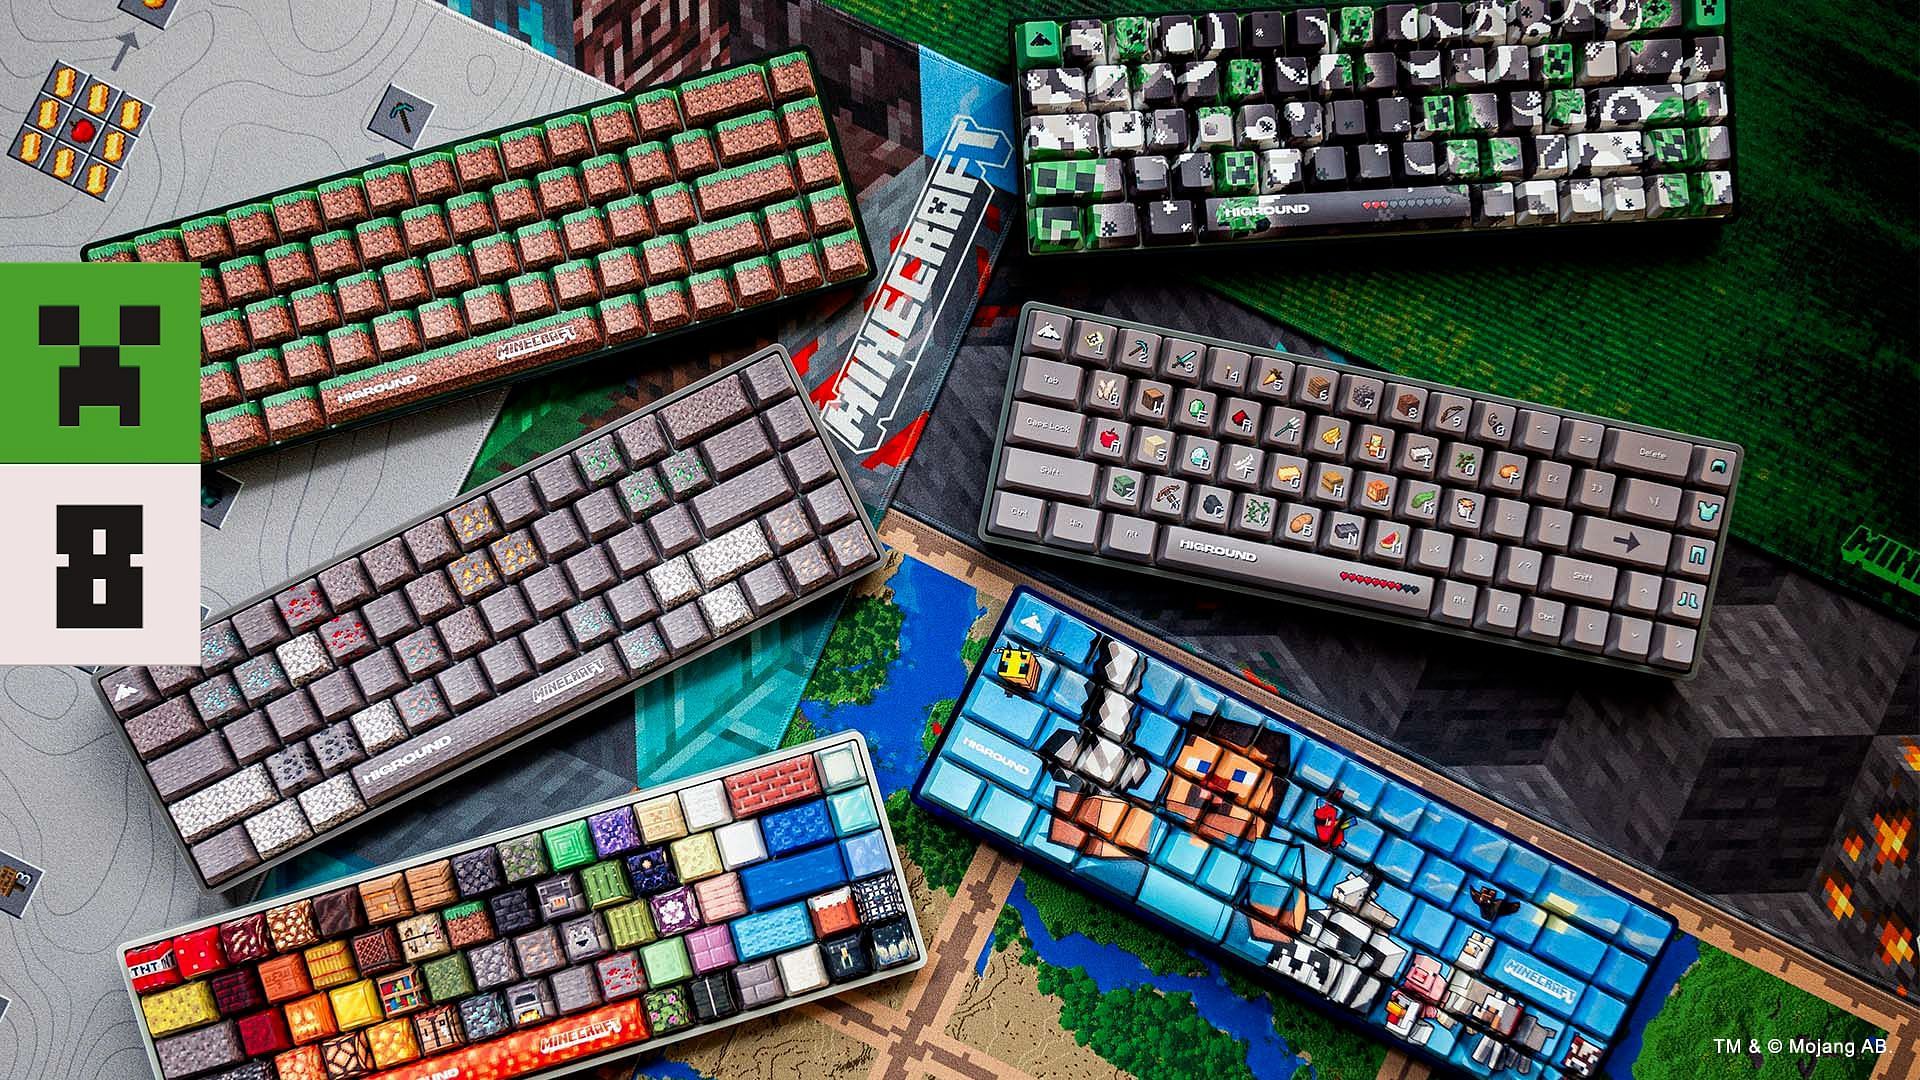 The different keyboards from Higround (Image via Mojang Studios)